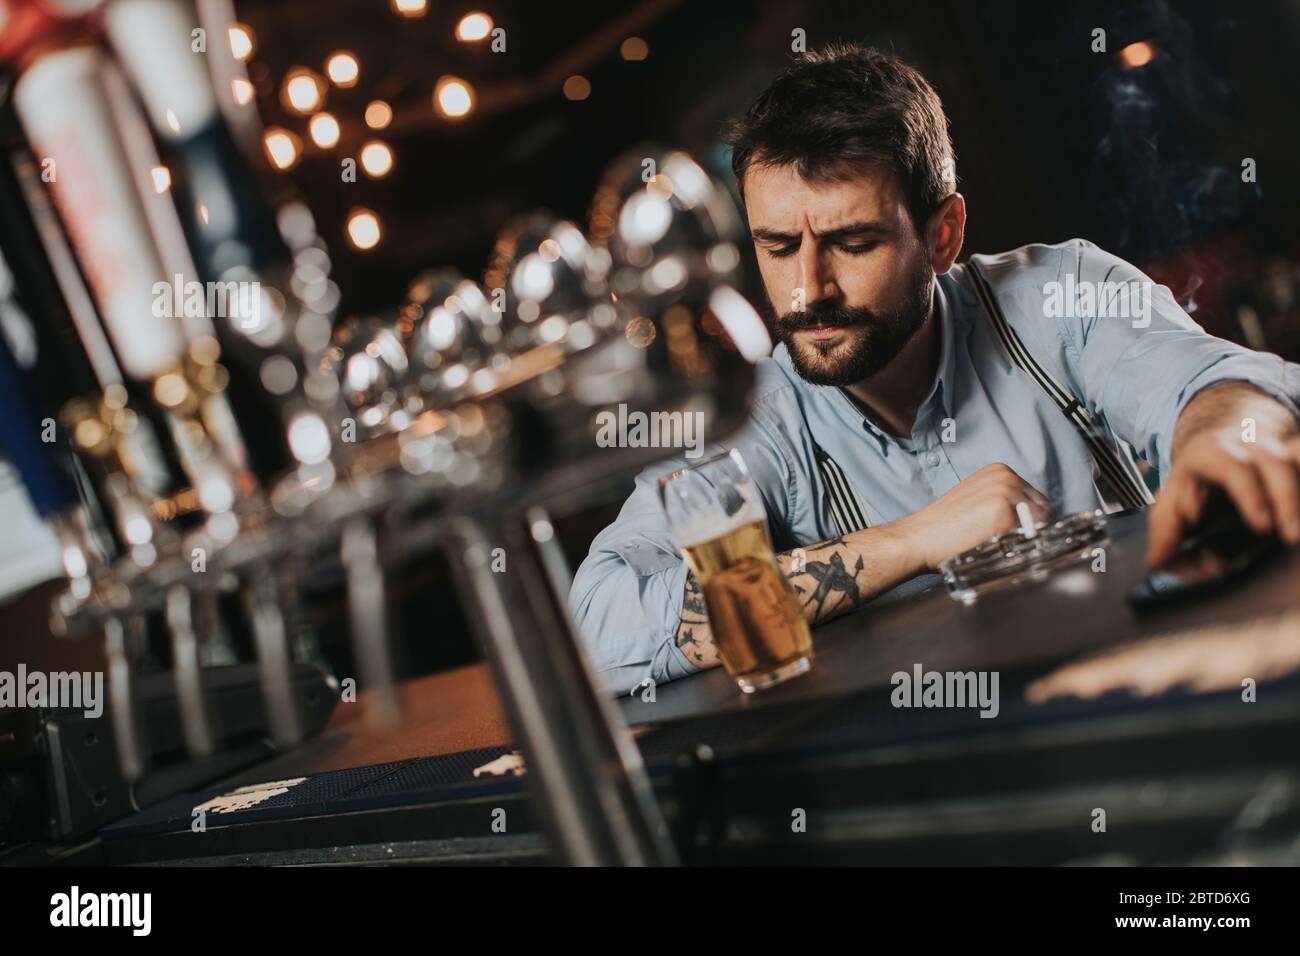 Young man drinking beer and smoking cigarette at pub in the night club Stock Photo